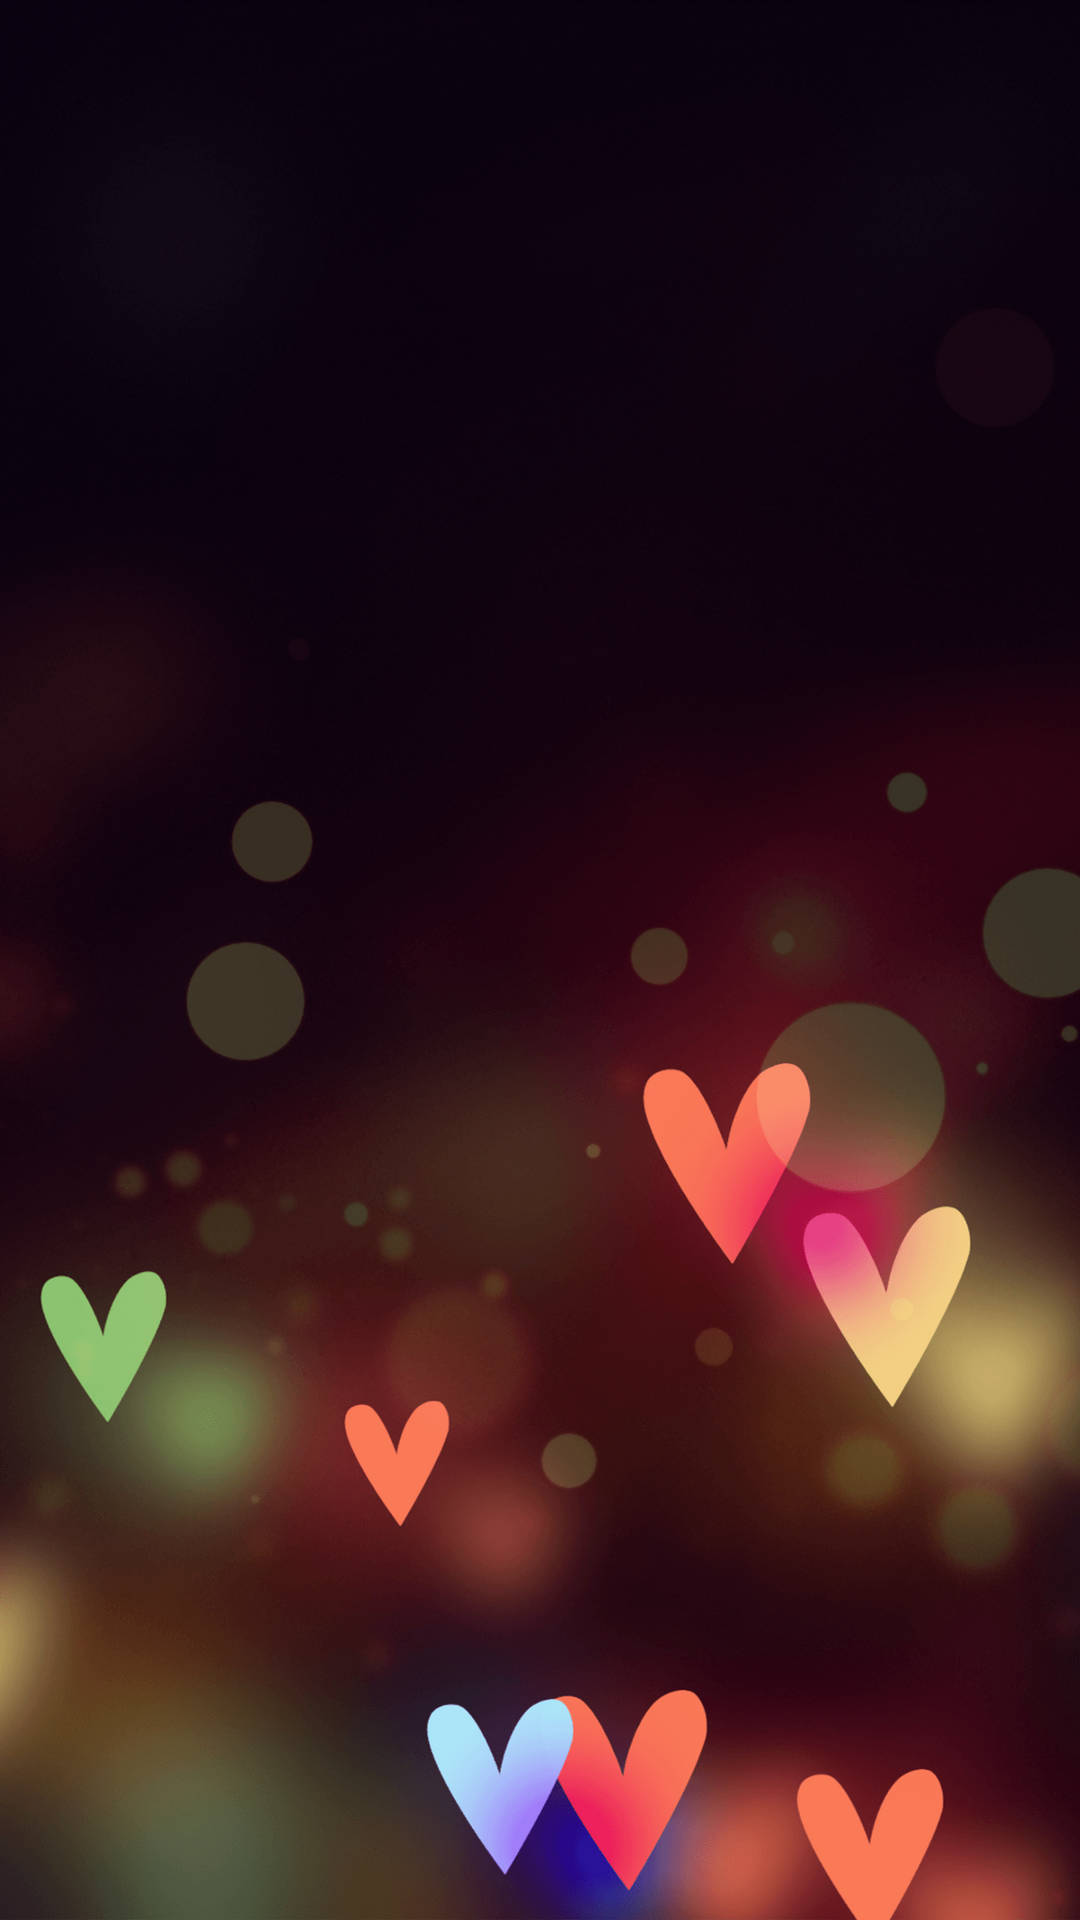 Free Love Iphone Wallpaper Downloads, [100+] Love Iphone Wallpapers for  FREE 